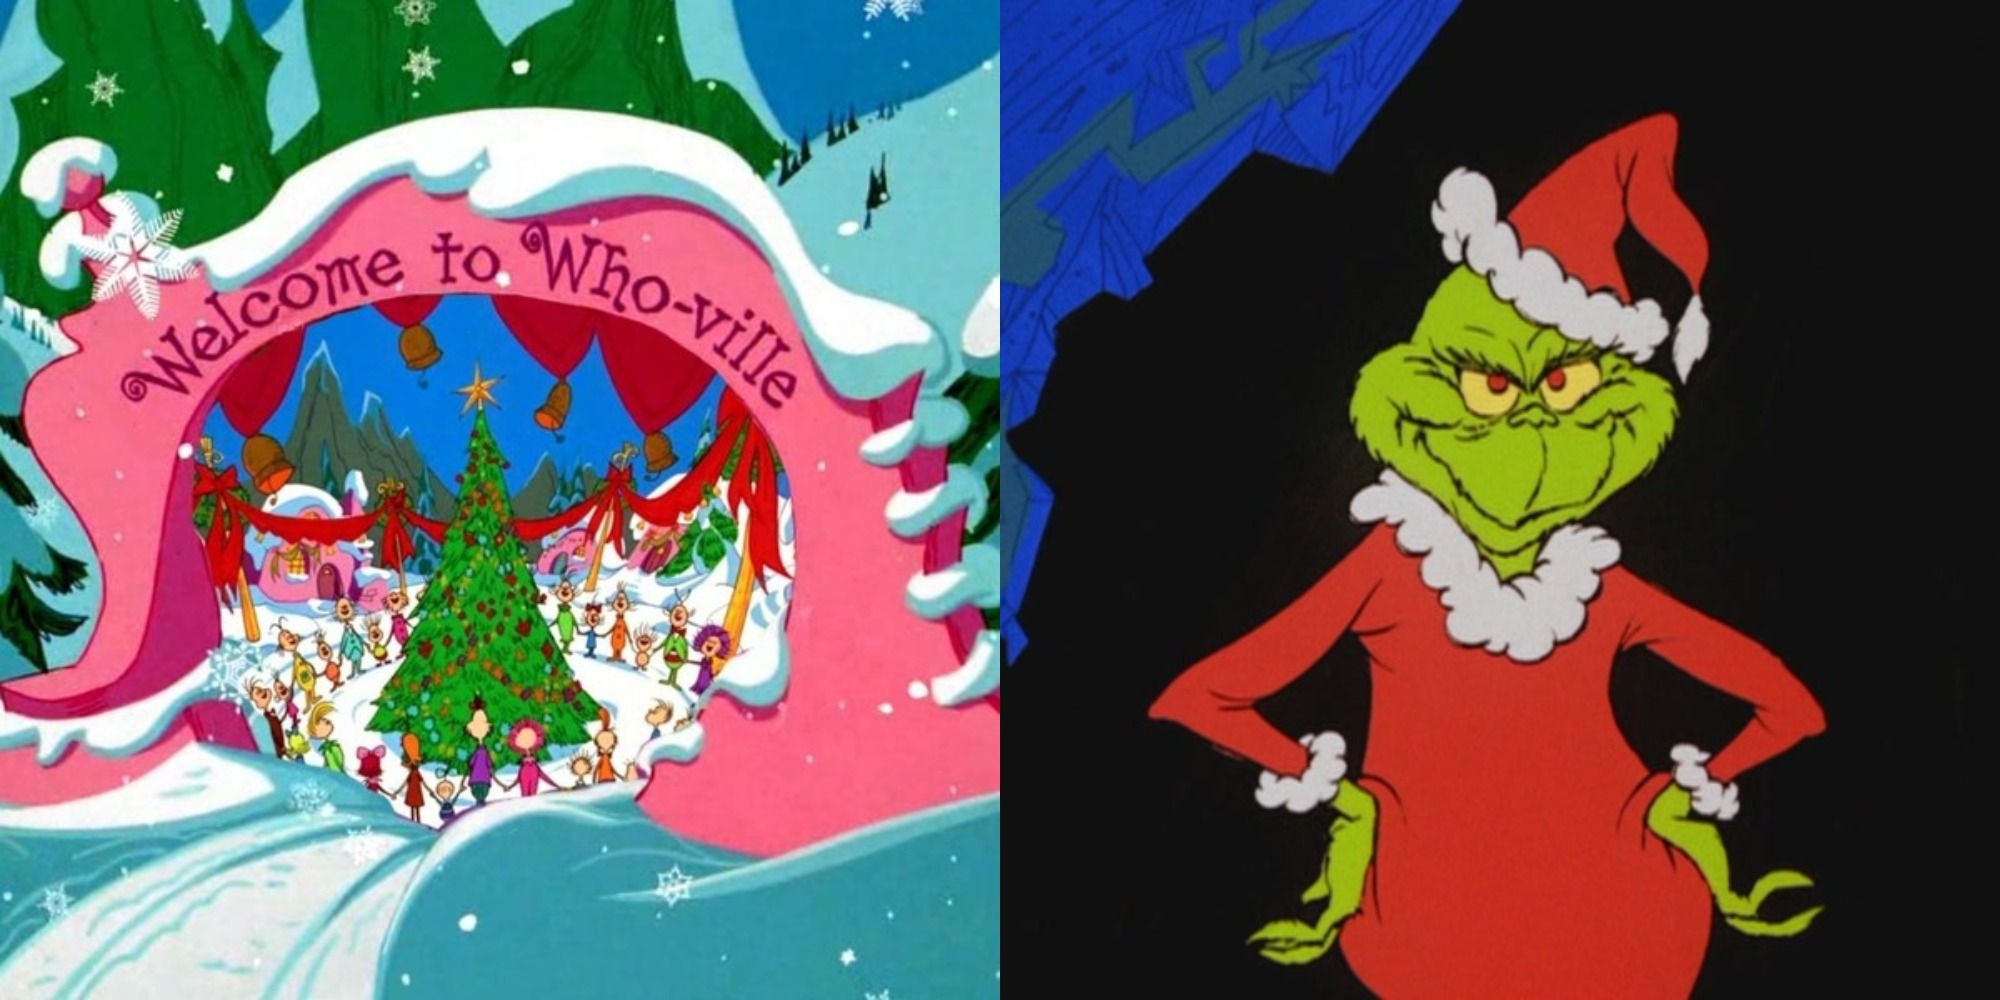 how the grinch stole christmas quotes cindy lou who